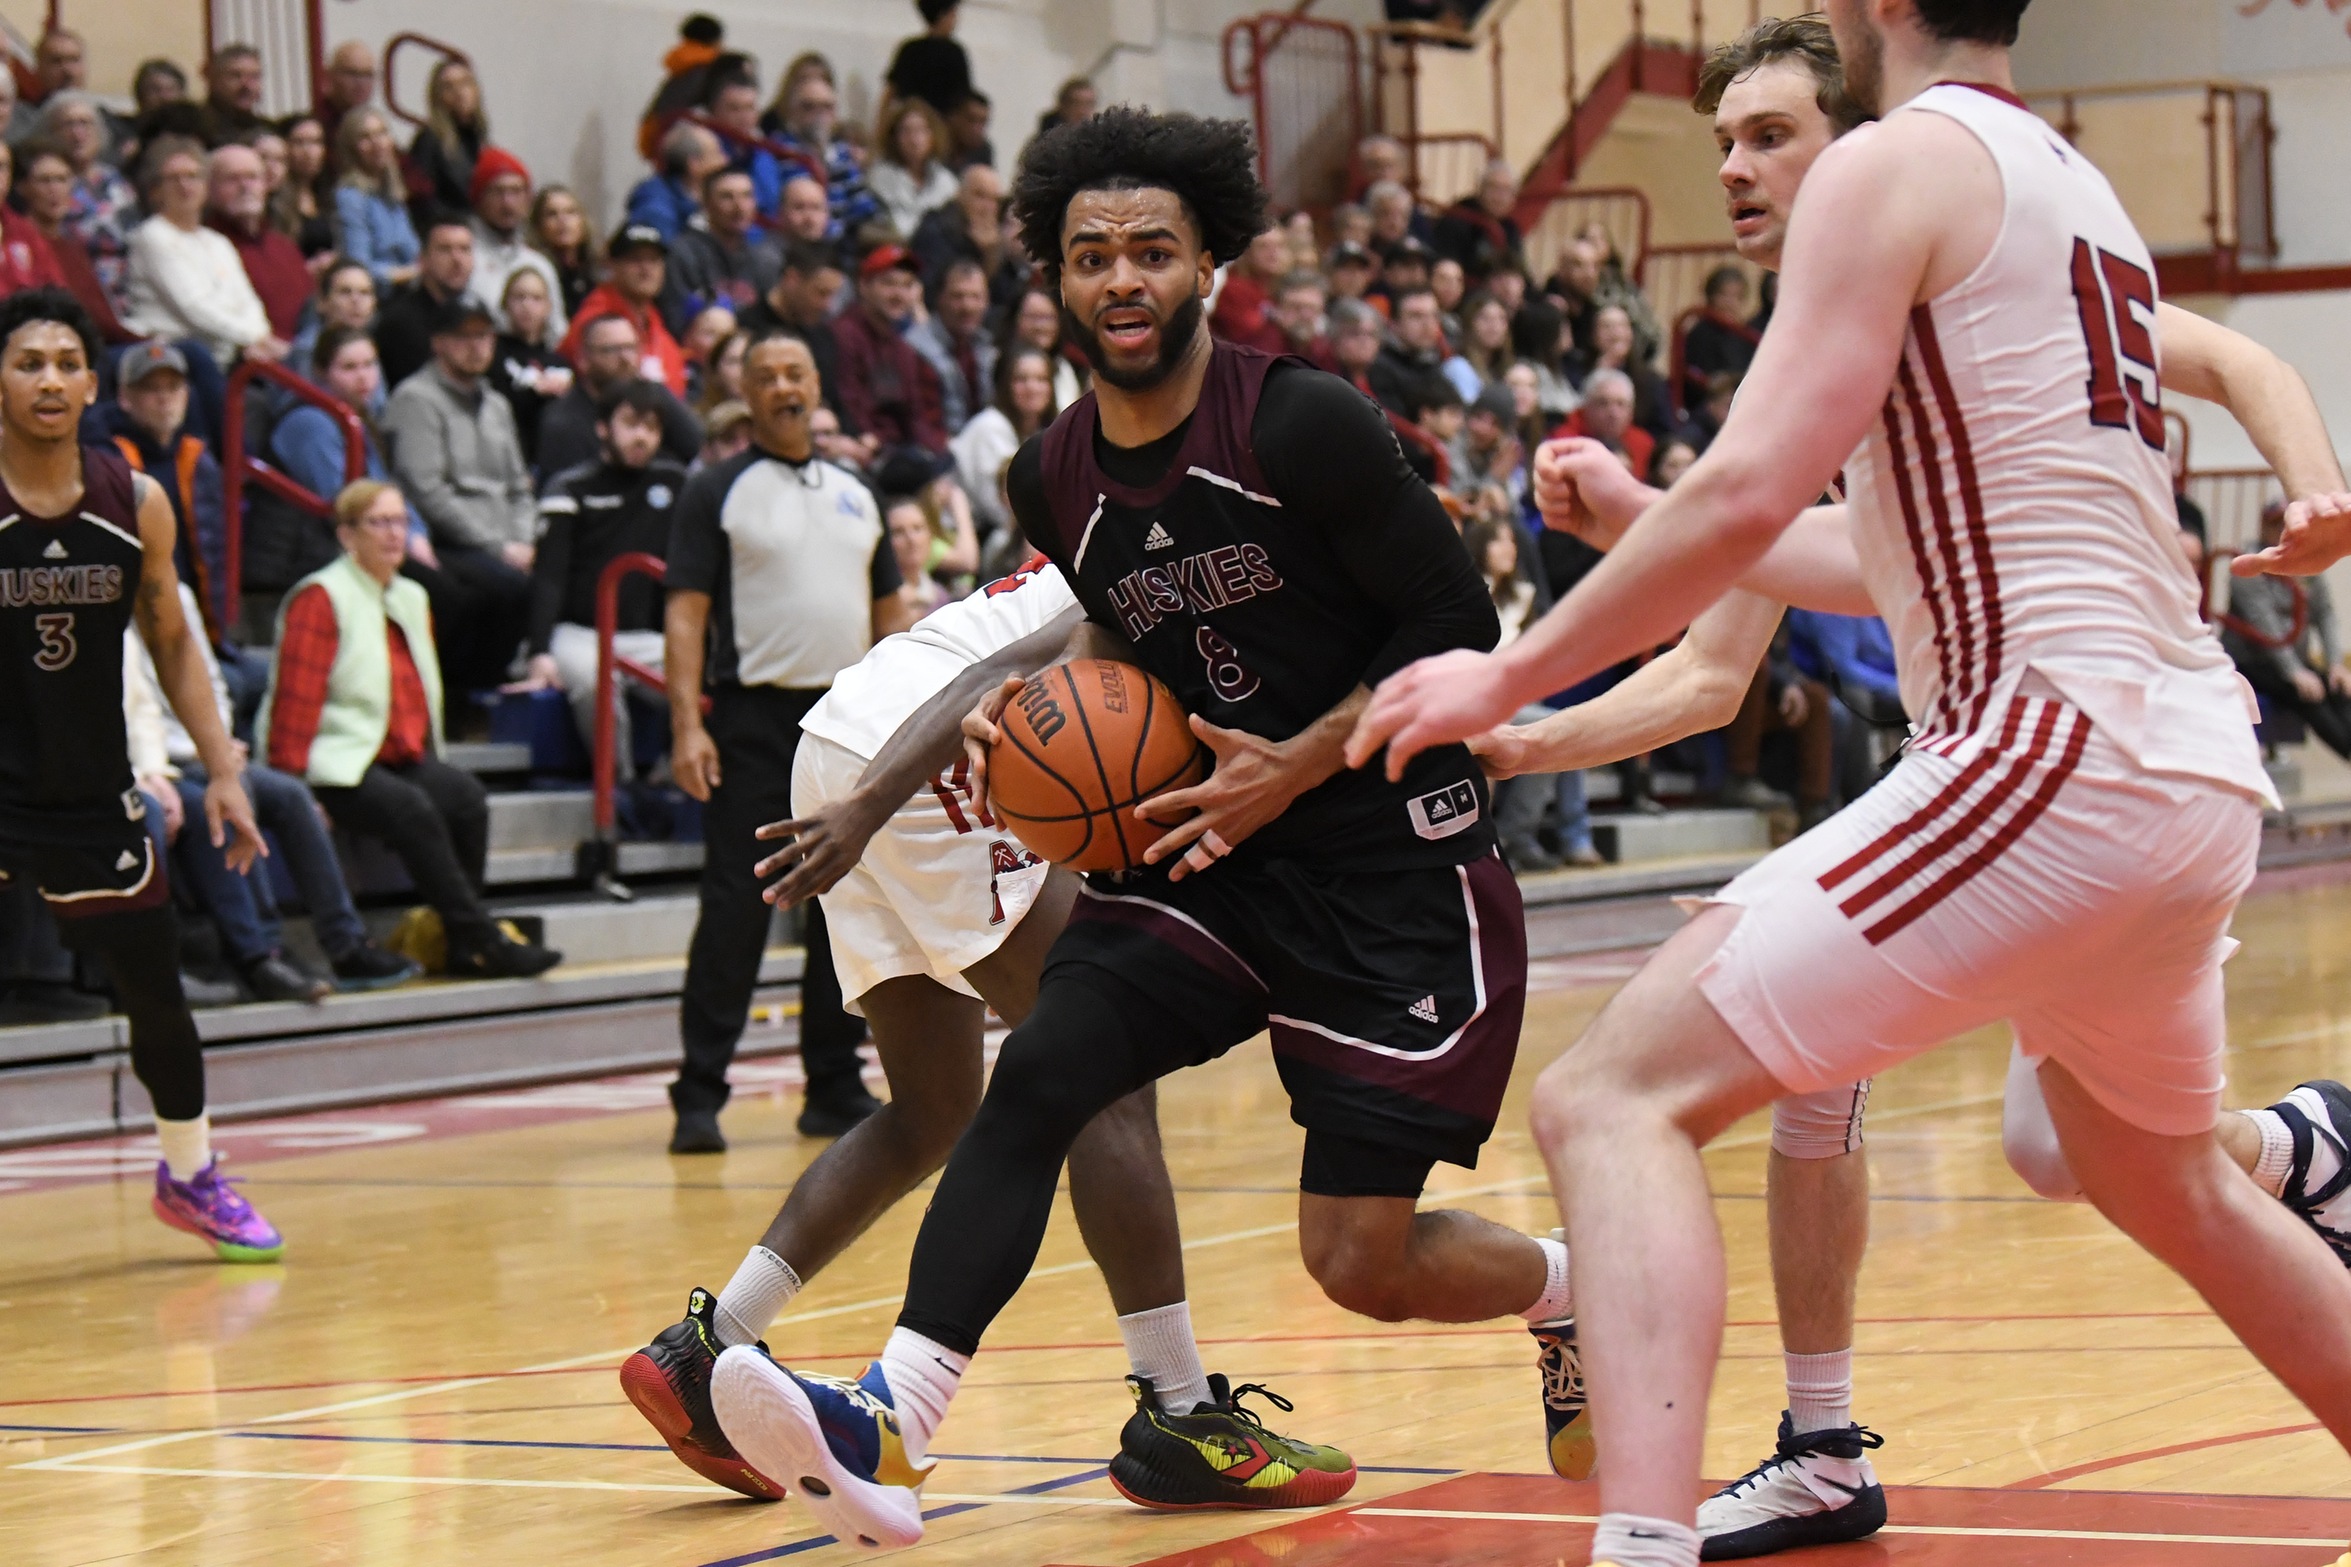 Linton-Brown delivers in the clutch to lead Huskies to 83-81 comeback win over Axemen